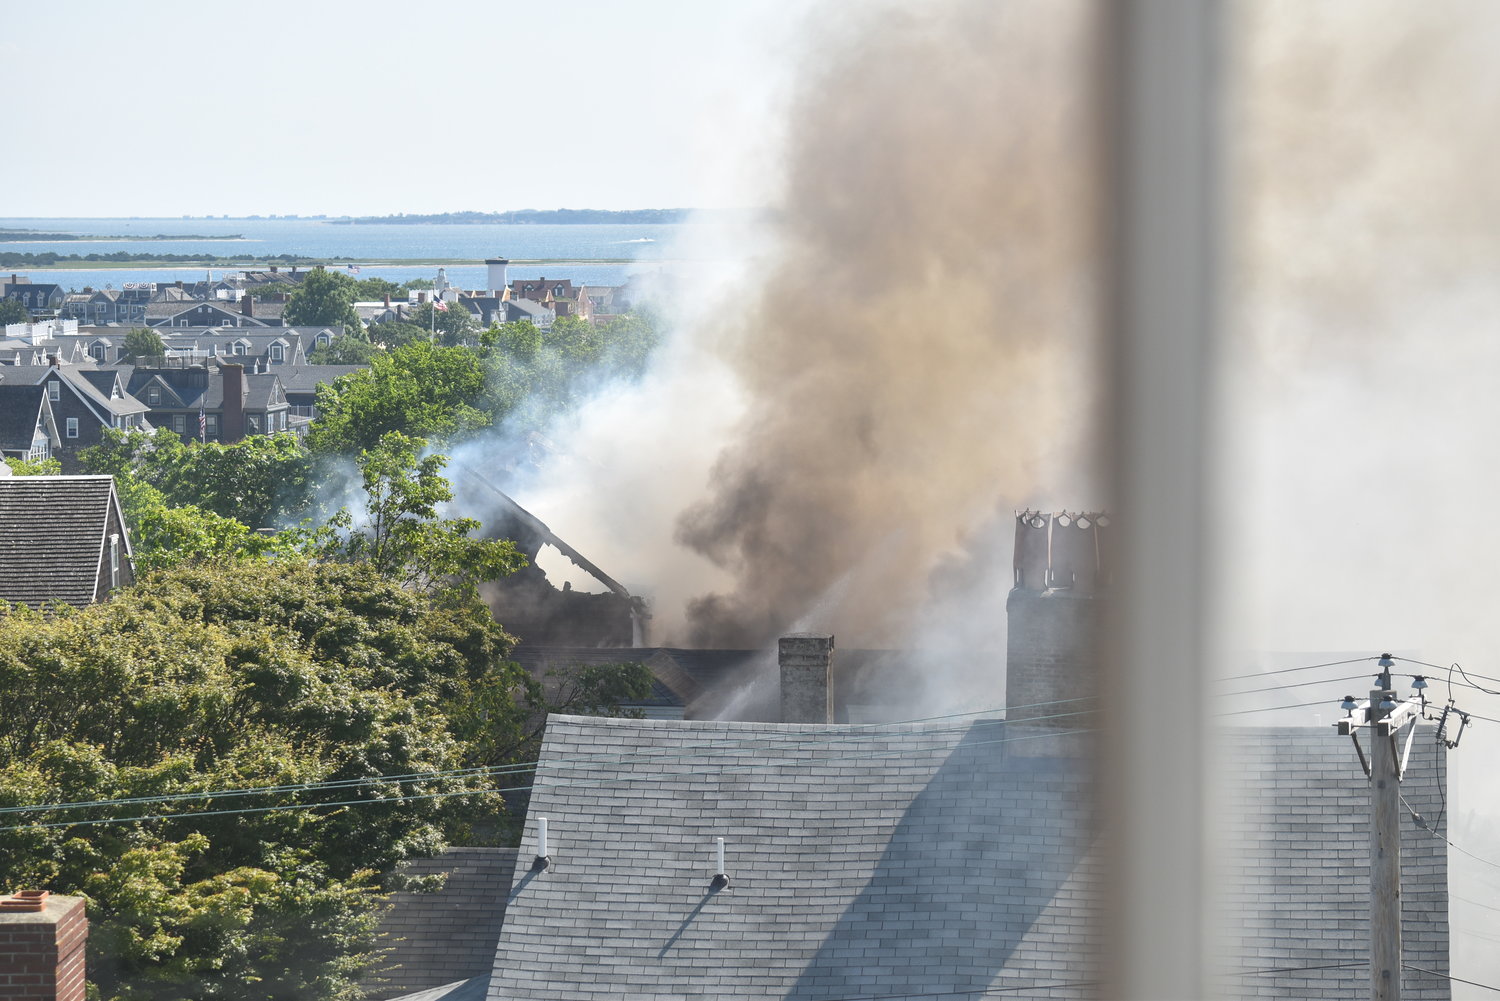 A view of the smoke from the Congregational Church tower.